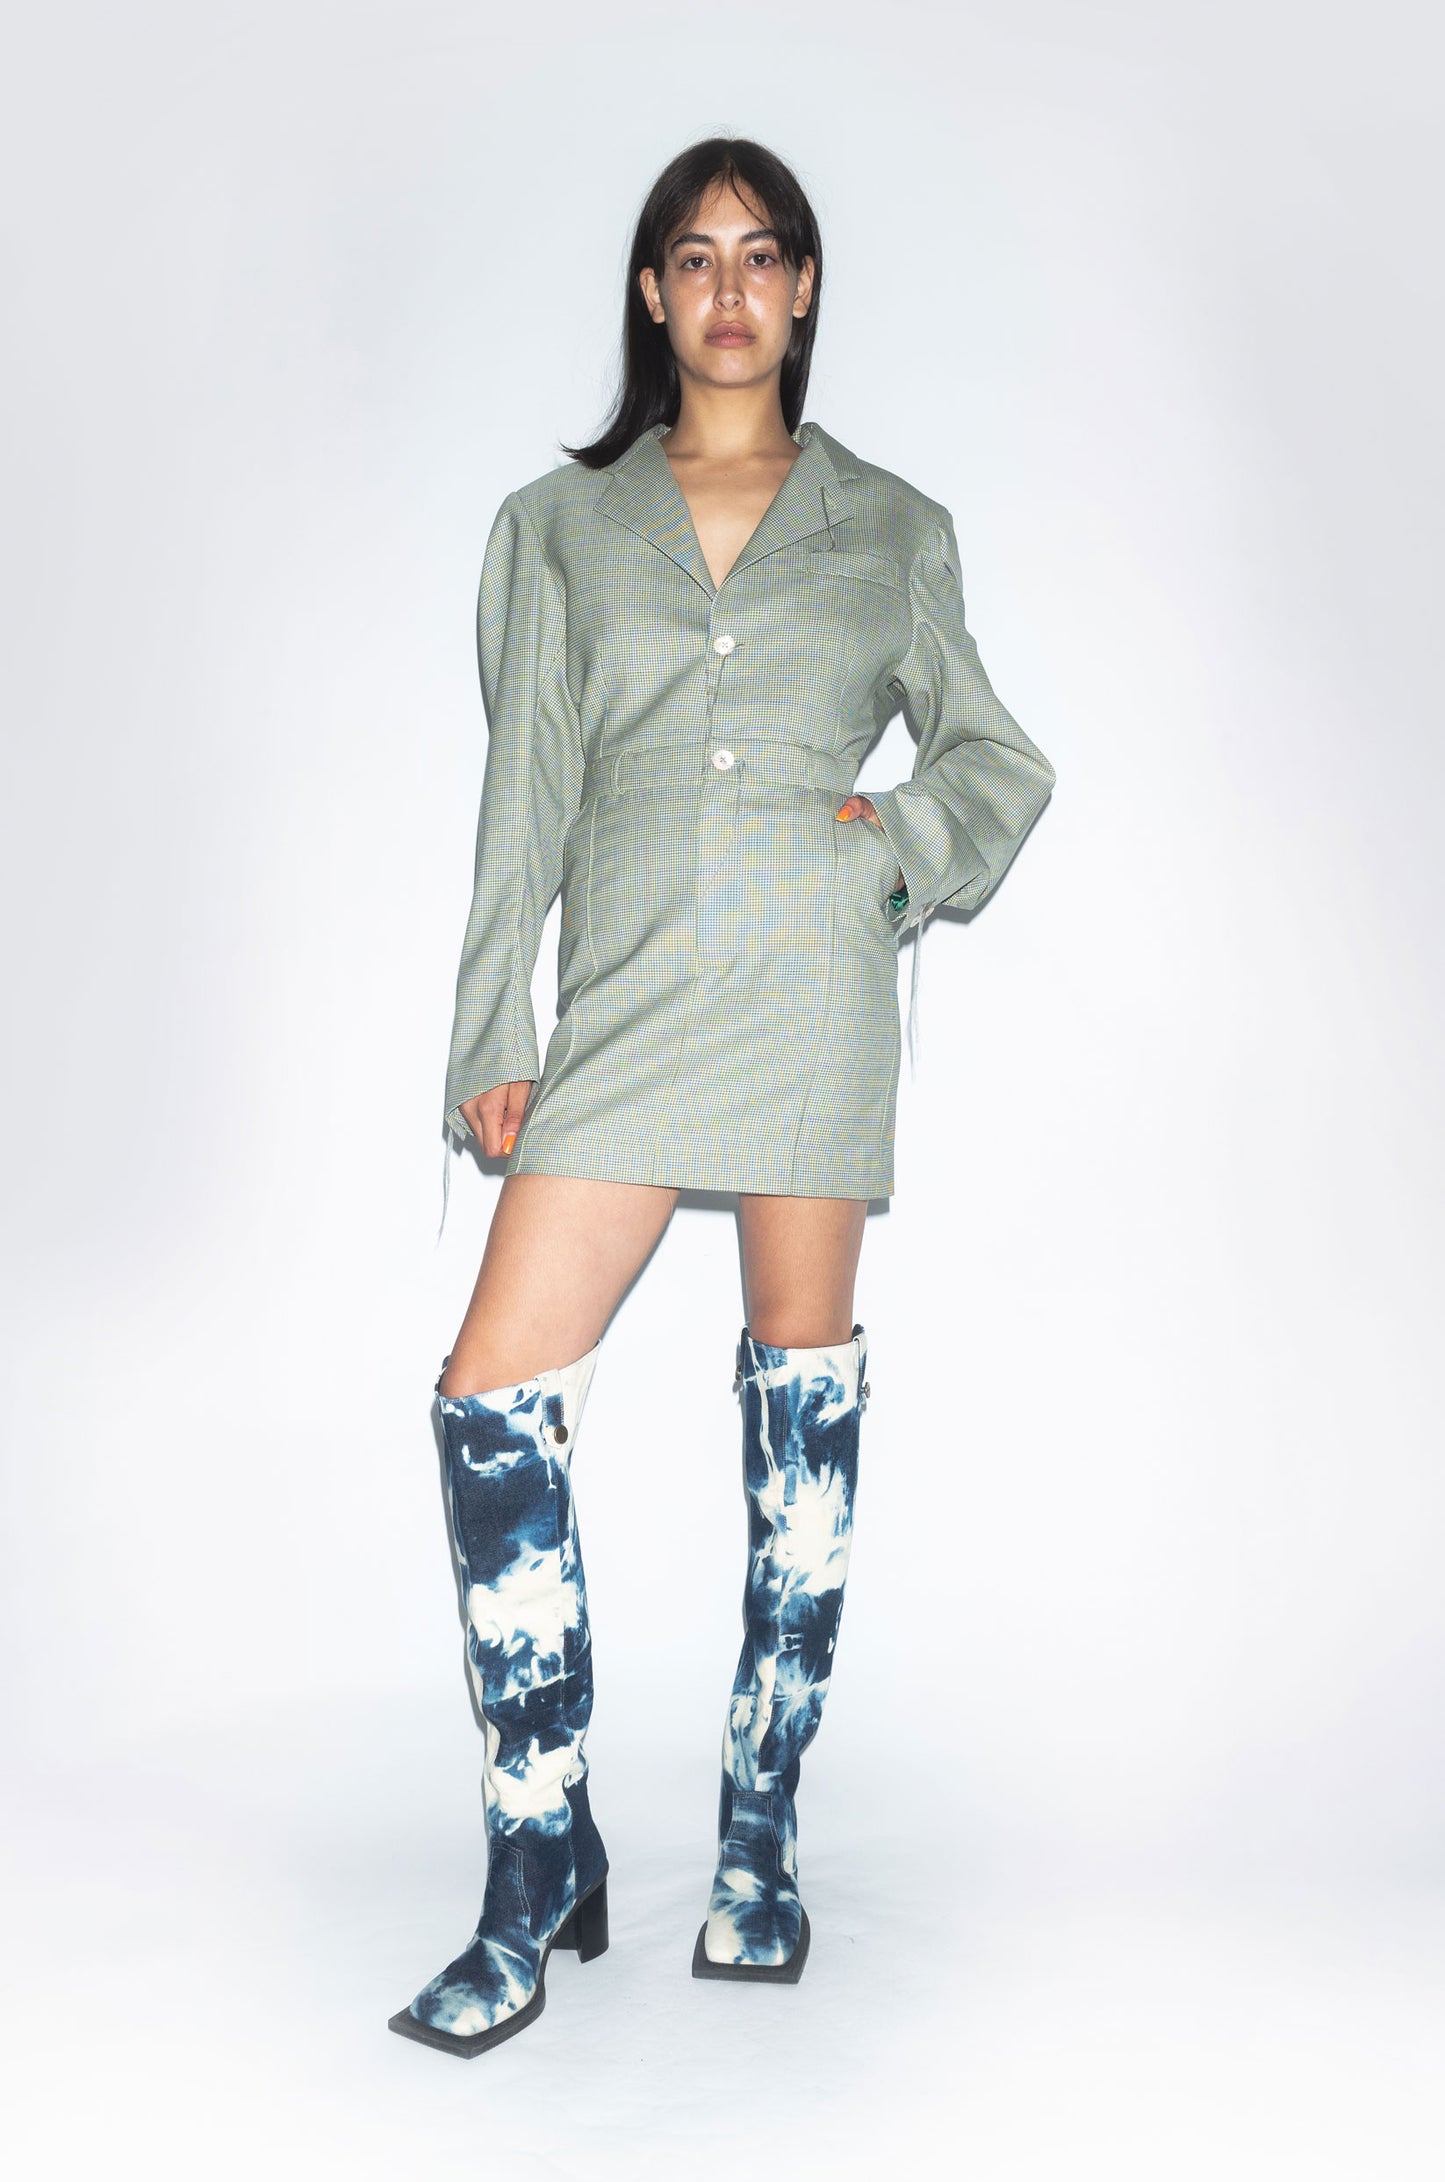 Archive Tradition Tailored Wool Dress in Blue/Green Check